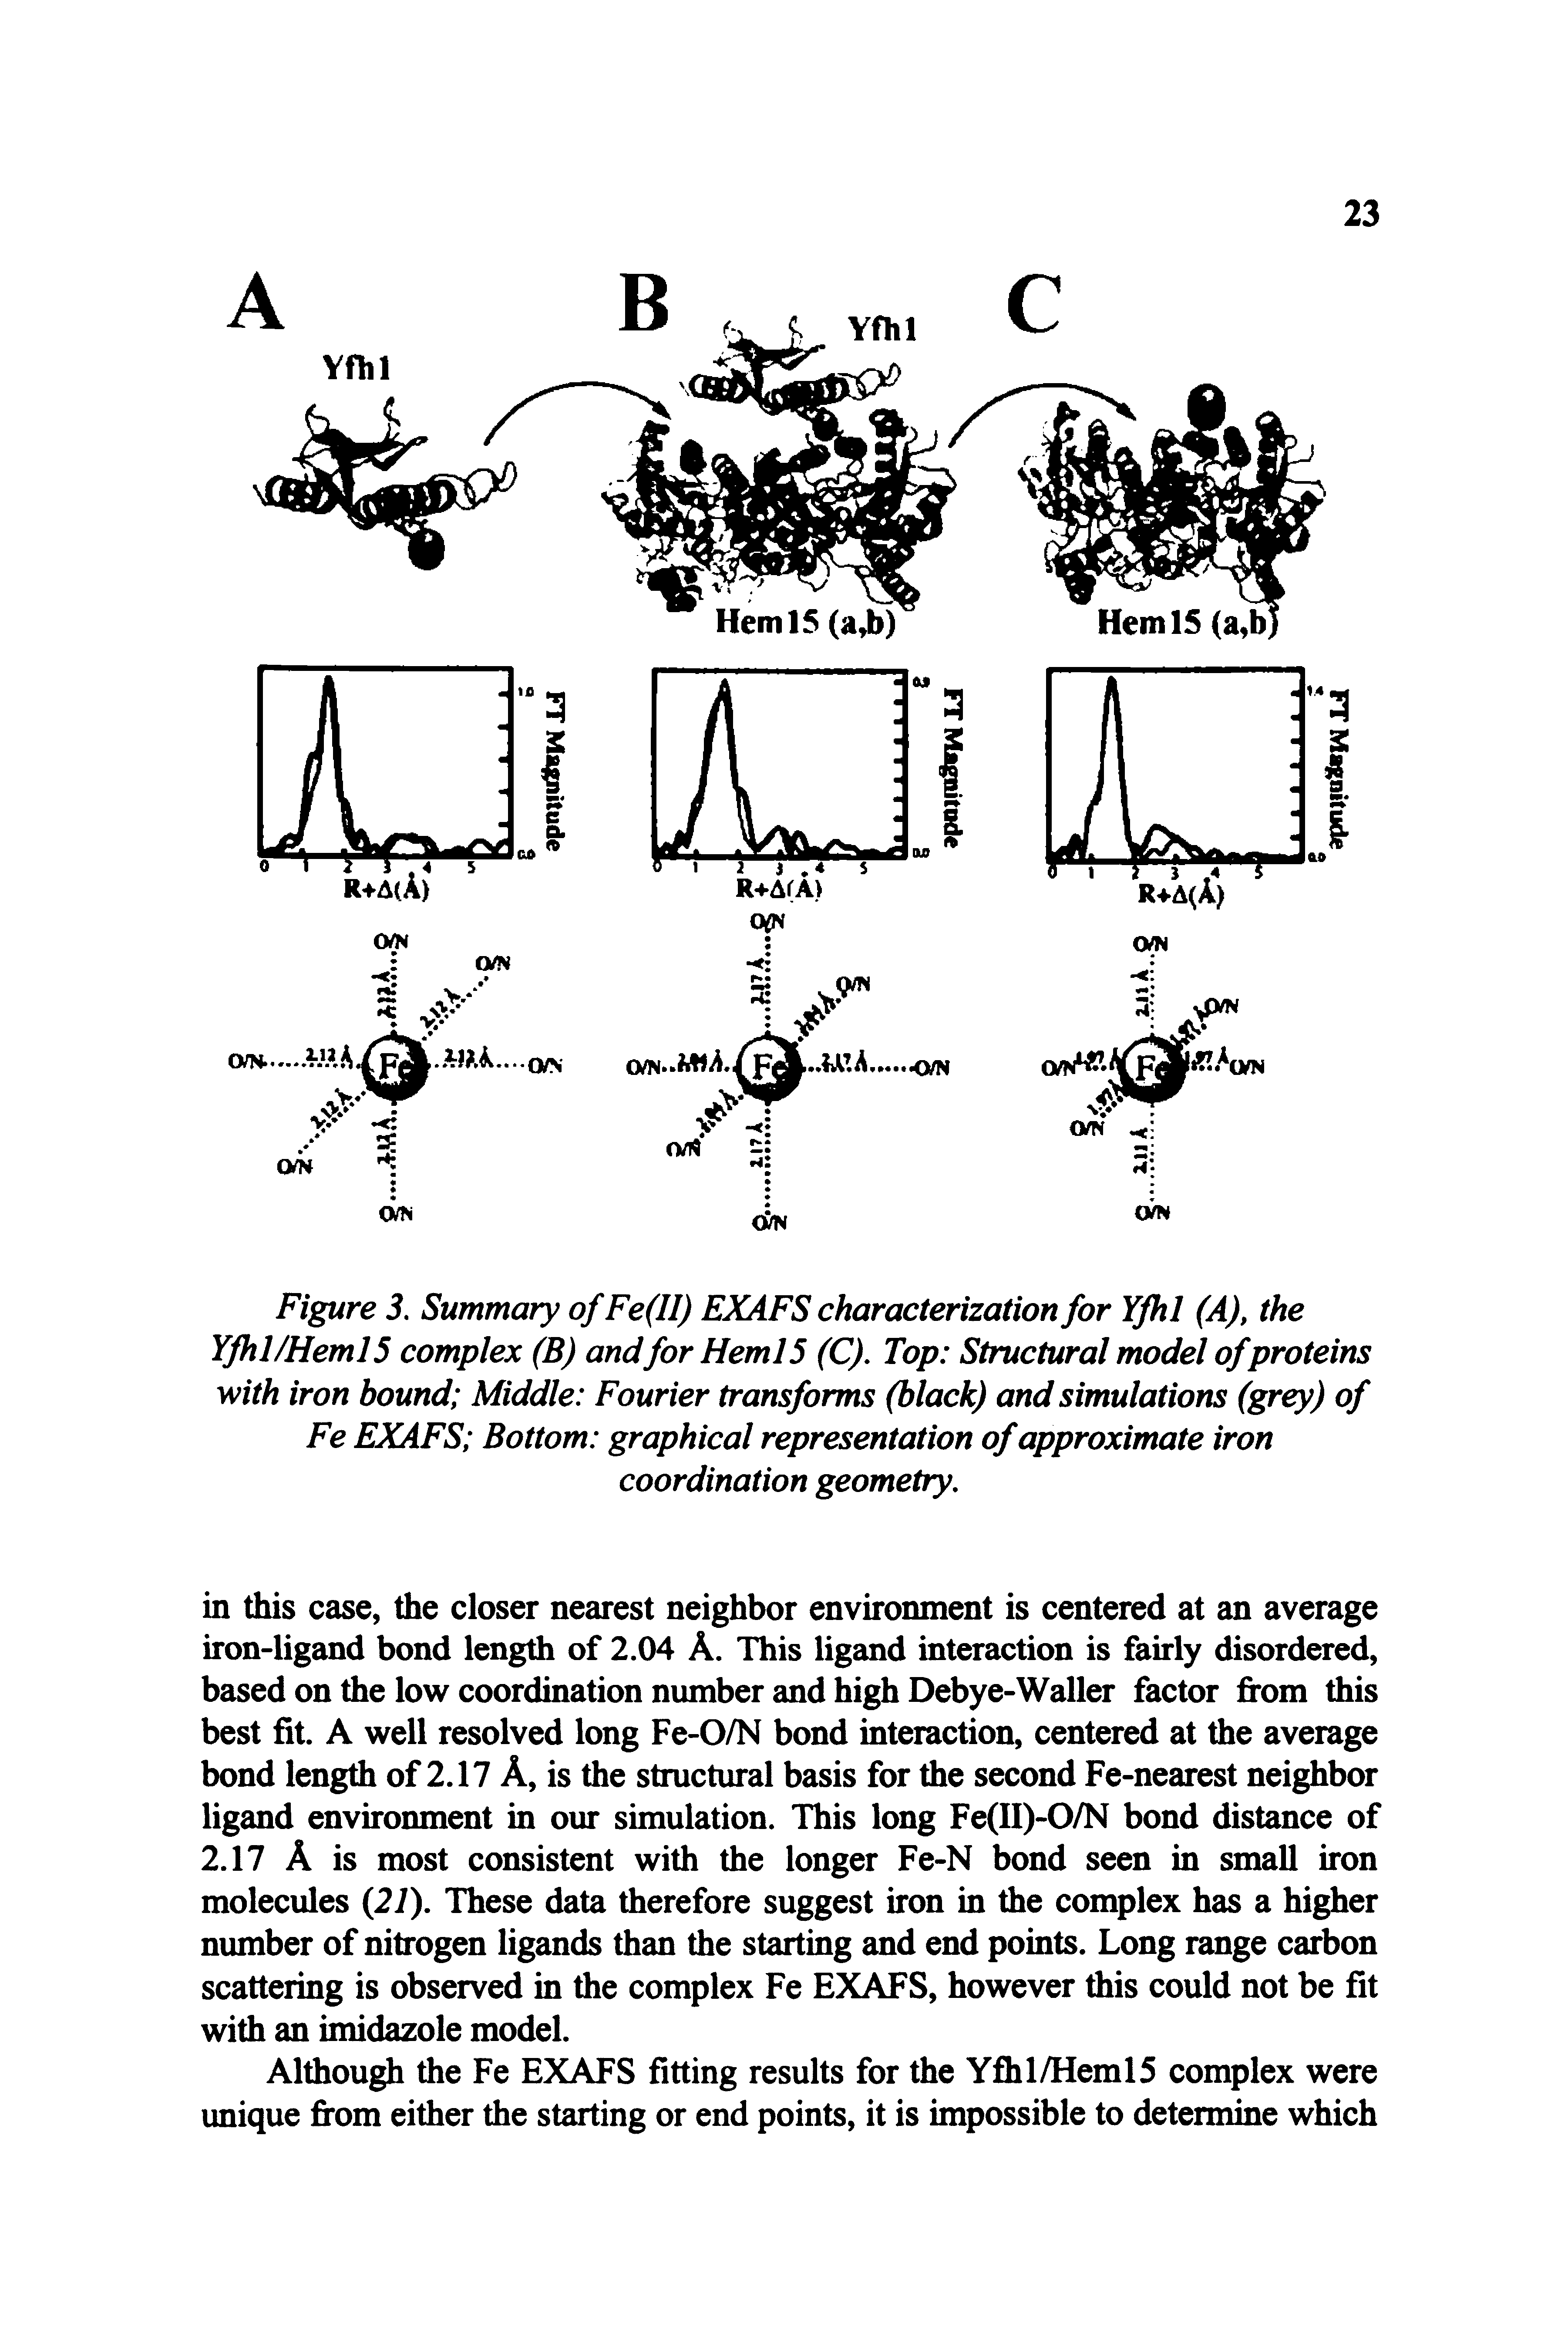 Figure 3. Summary ofFe(II) EXAFS characterization for YJhl (A), the Yfhl/Heml5 complex (B) and for HemlS (C), Top Structural model of proteins with iron bound Middle Fourier transforms (black) and simulations (grey) of Fe EXAFS Bottom graphical representation of approximate iron coordination geometry.